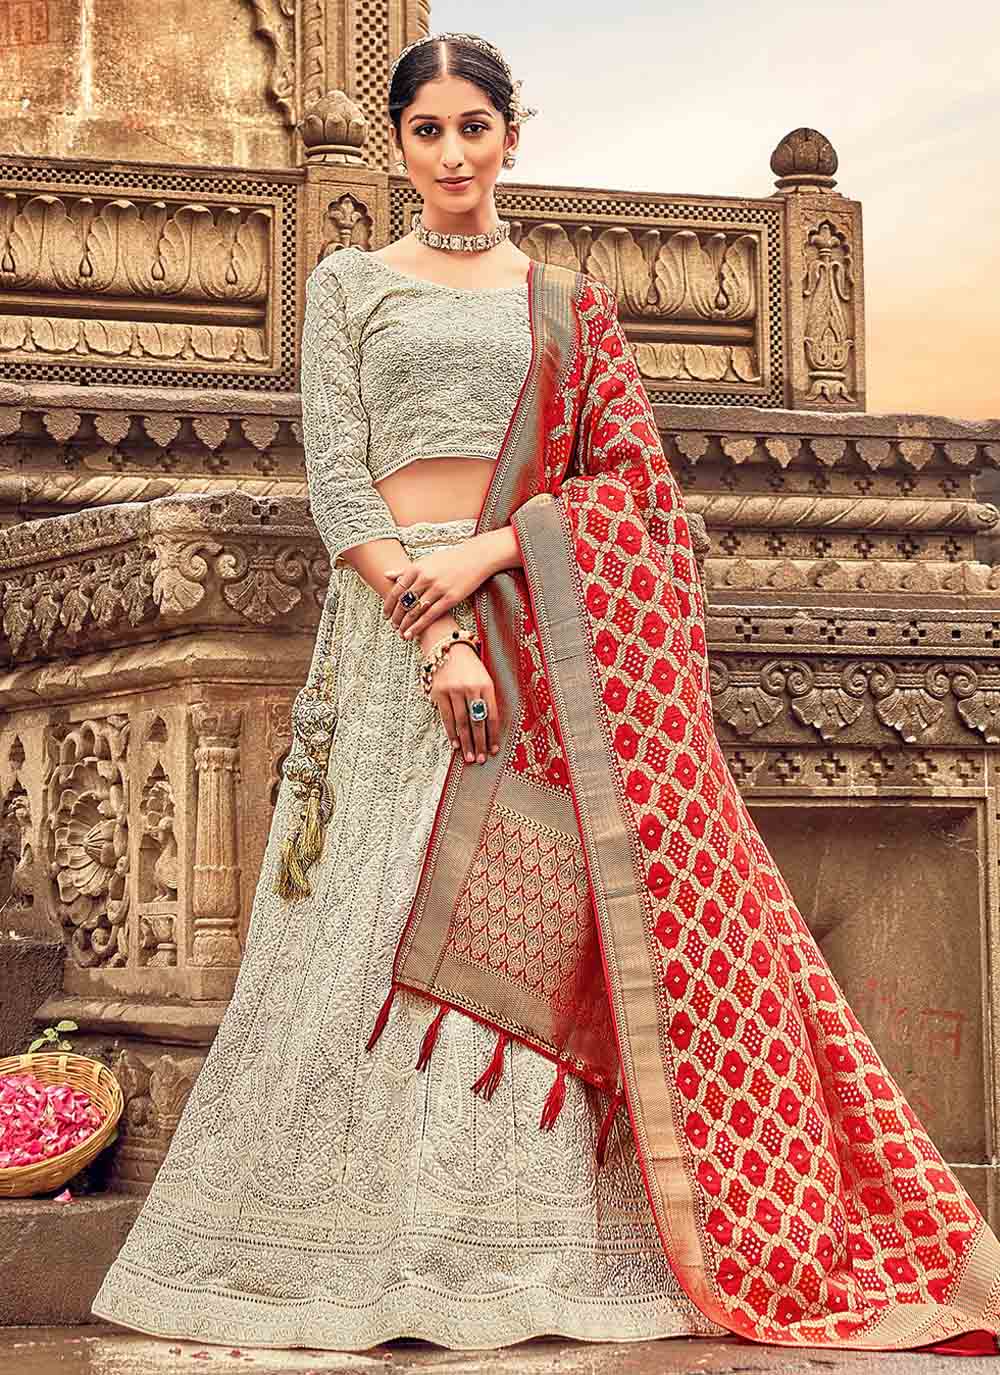 Complete Golden Wedding Lehenga Style Guide For Brides